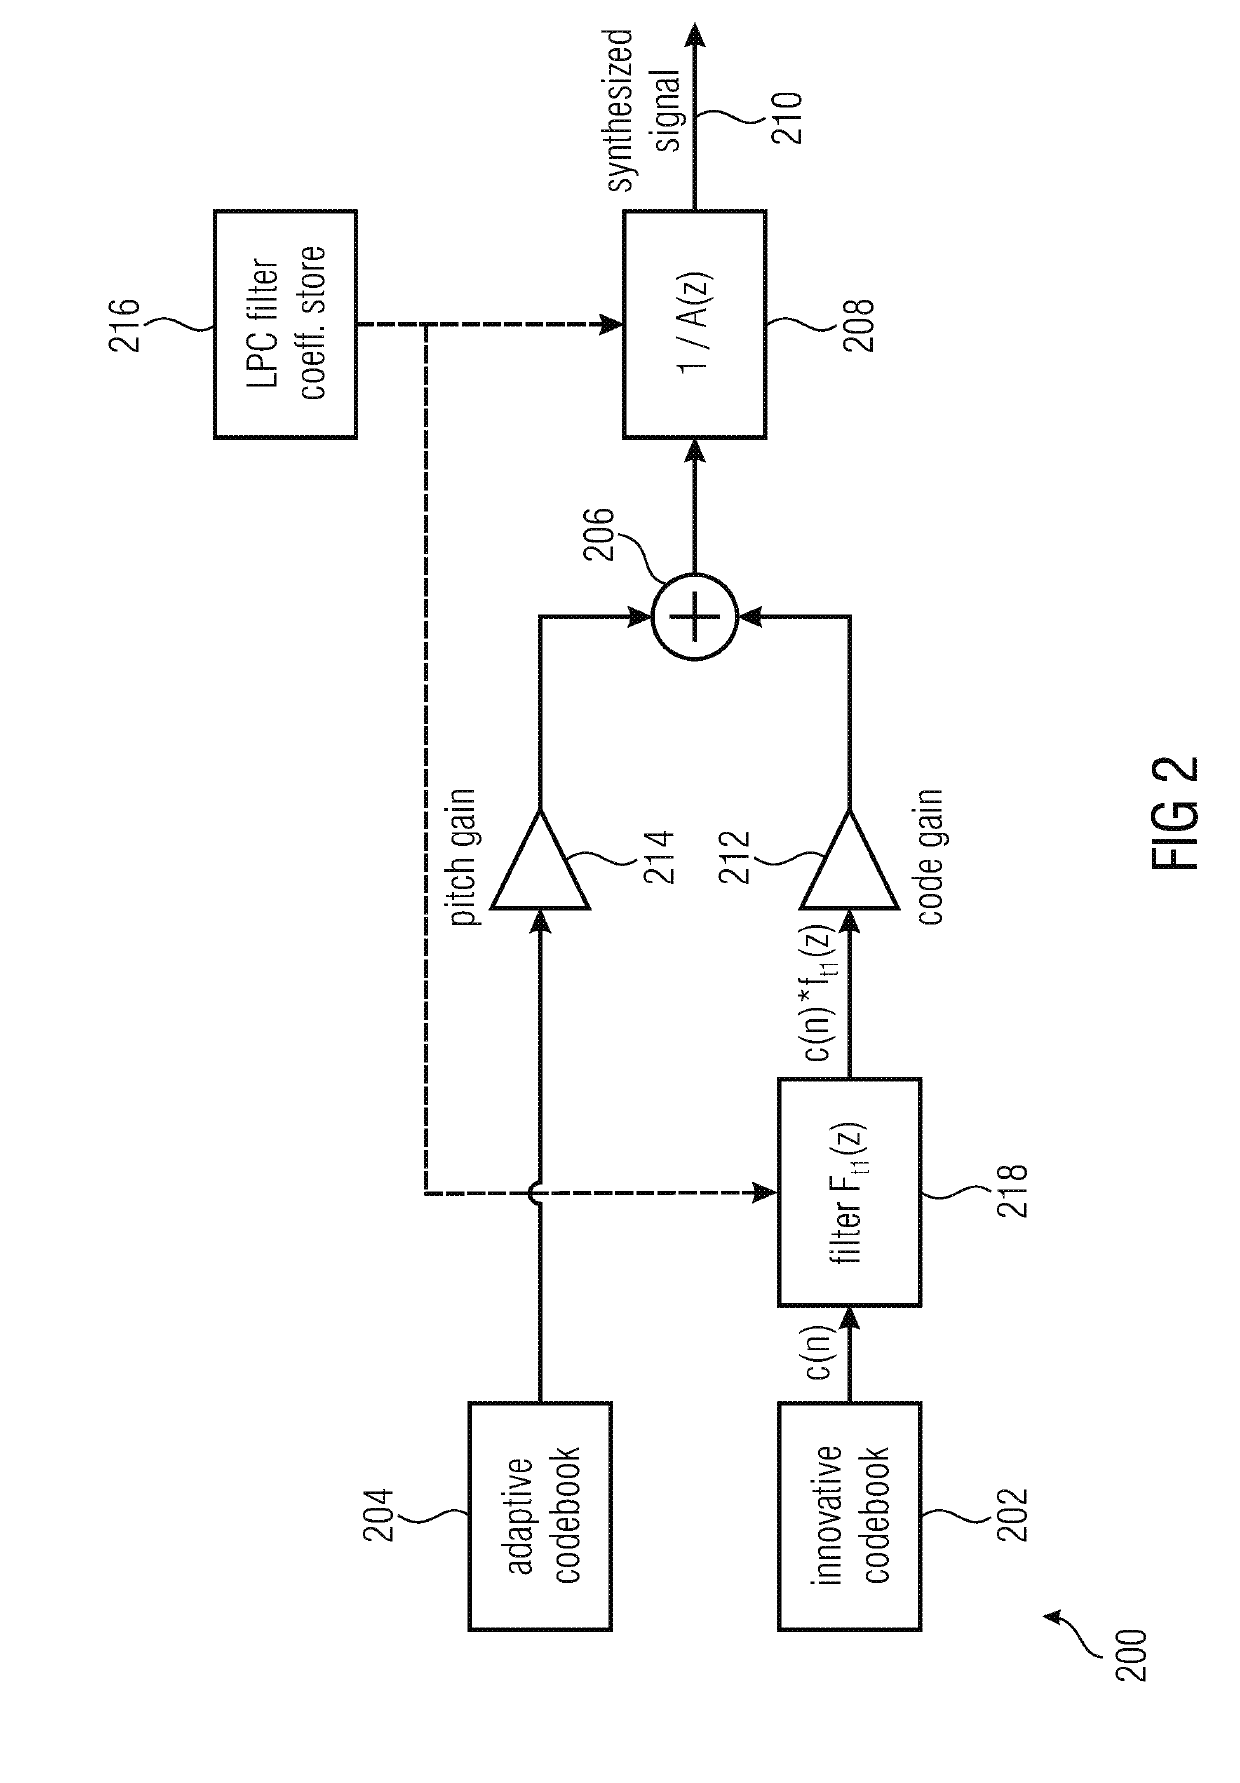 Apparatus and method for synthesizing an audio signal, decoder, encoder, system and computer program